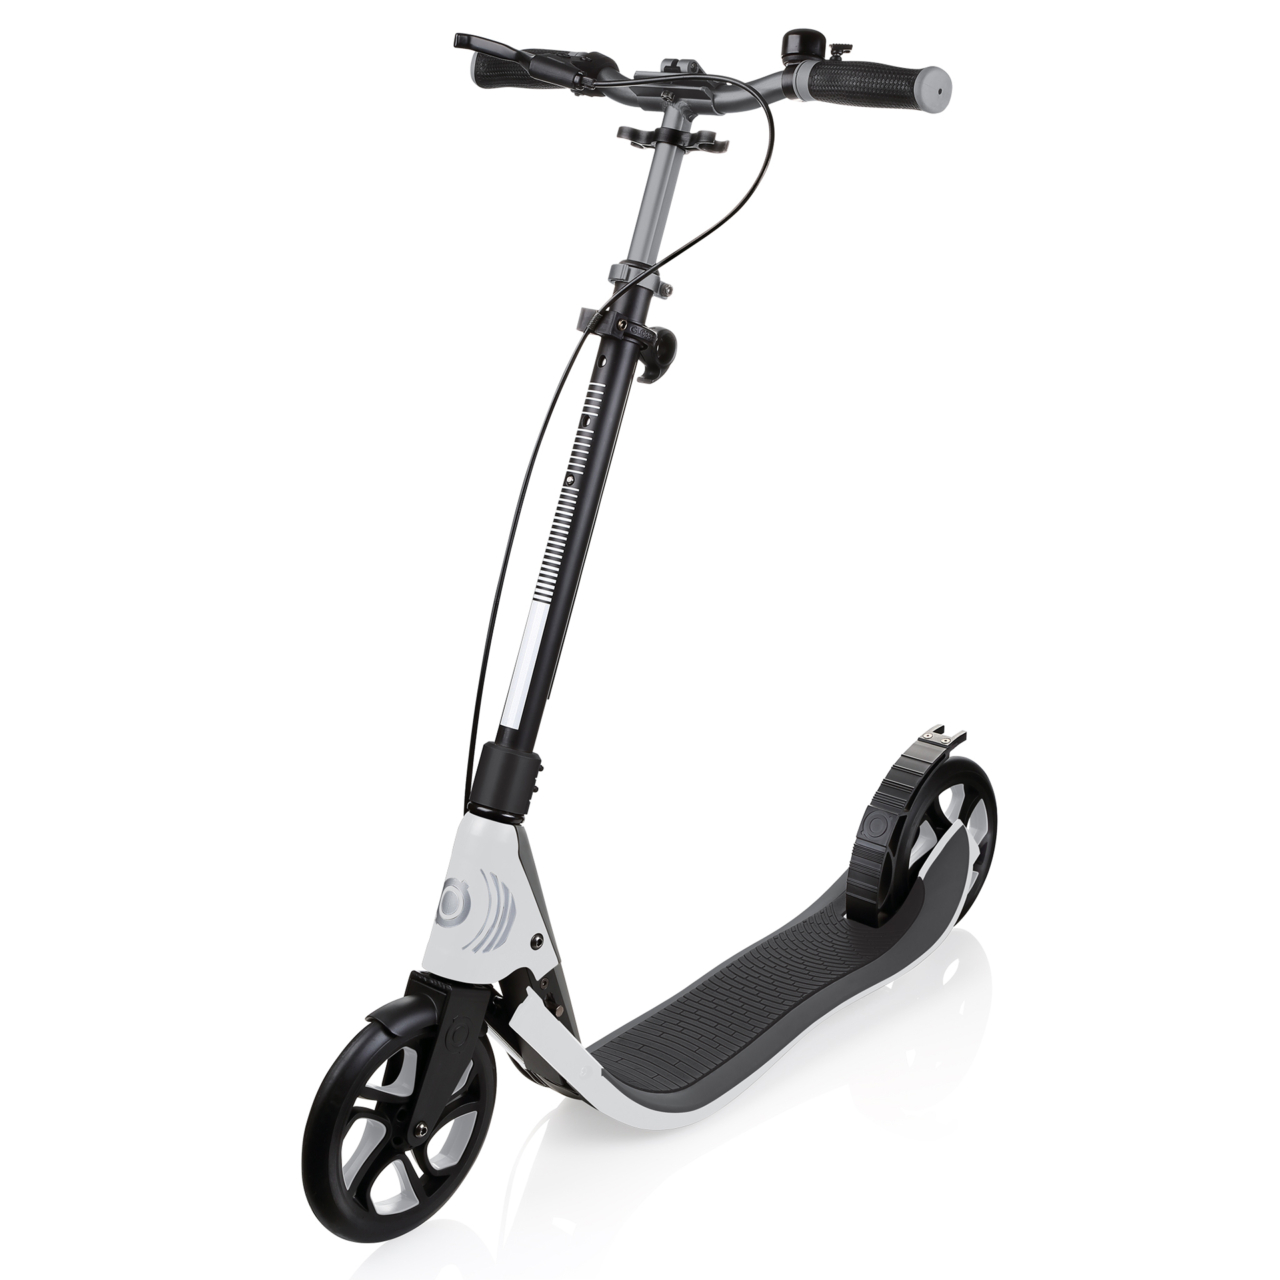 478 106 Kick Scooter For Adults